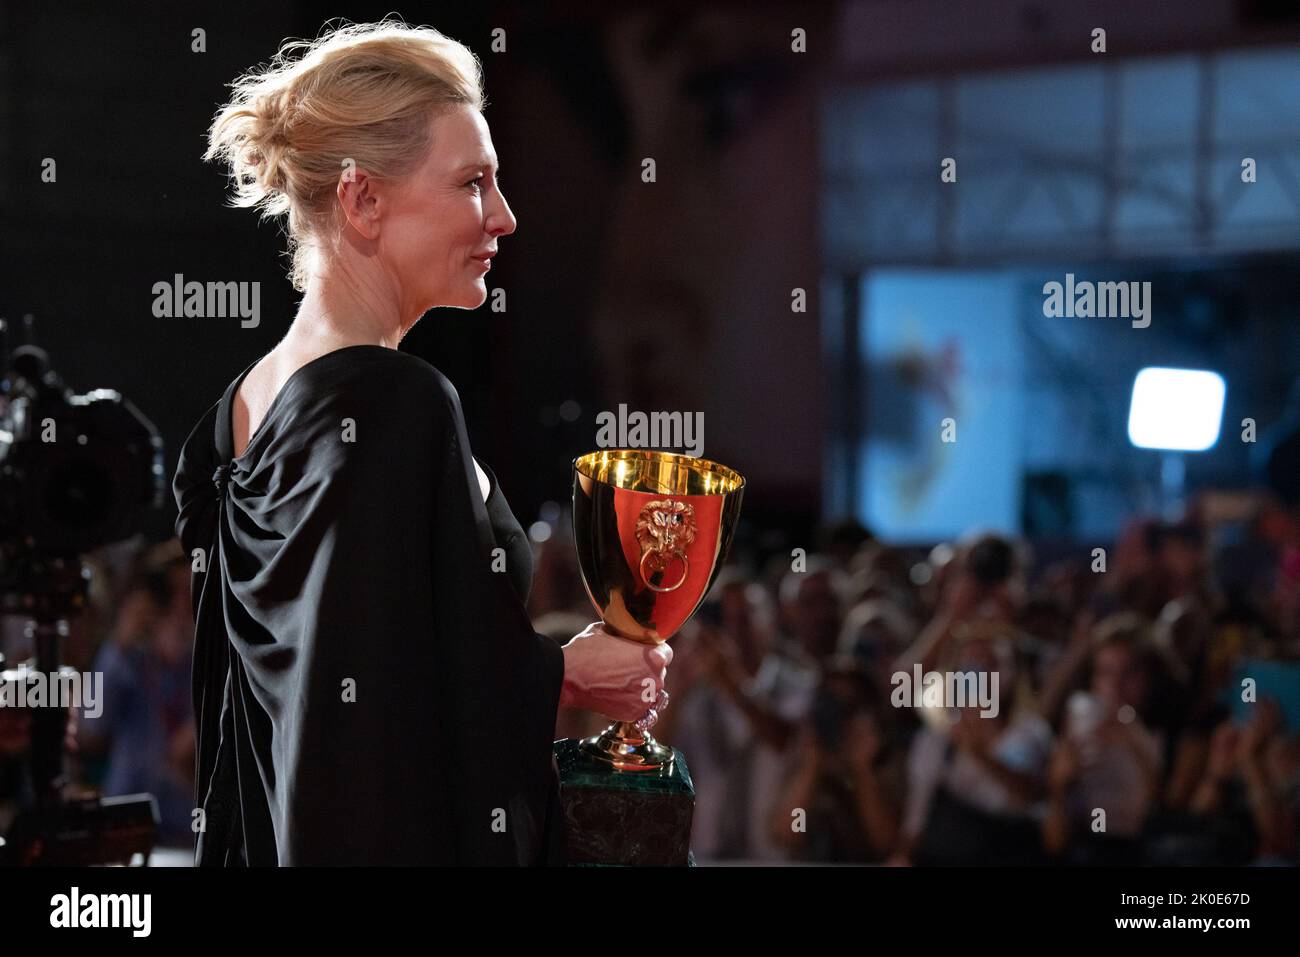 Cate Blanchett poses with the Coppa Volpi for Best Actress for 'Tar' during the award winners photocall at the 79th Venice International Film Festival Stock Photo